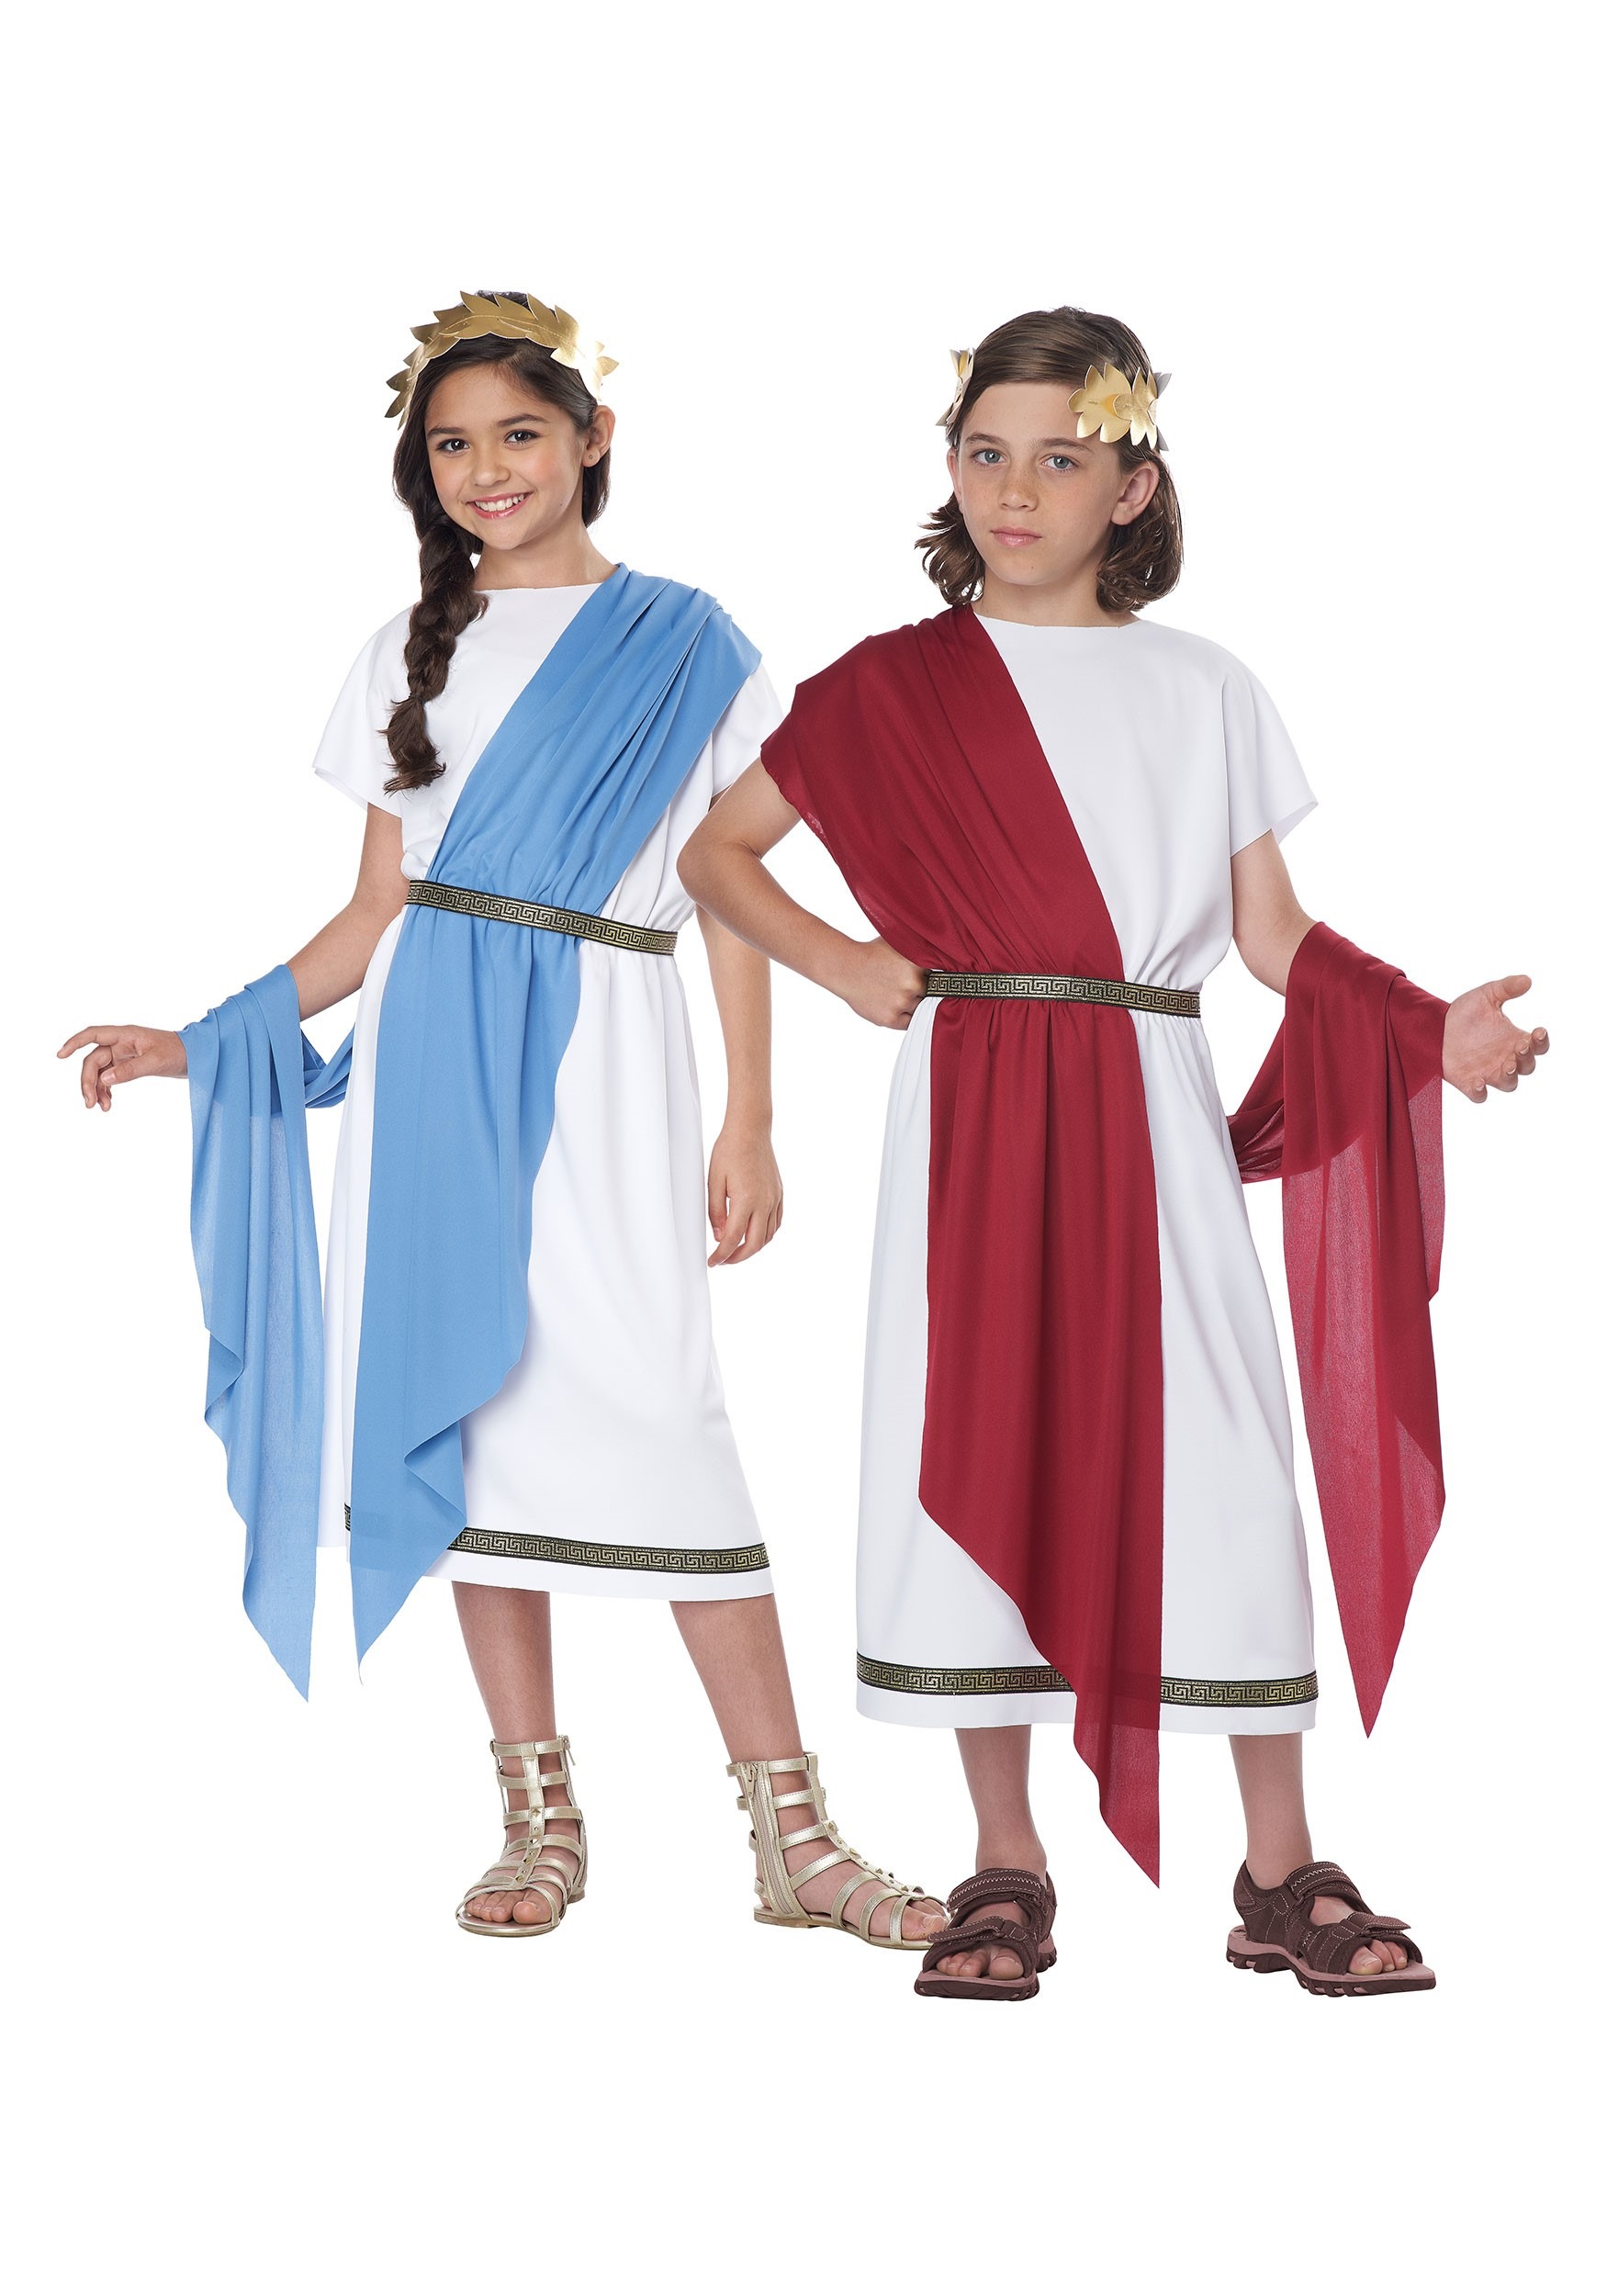 Photos - Fancy Dress California Costume Collection Child Toga Costume Red/Blue/White 